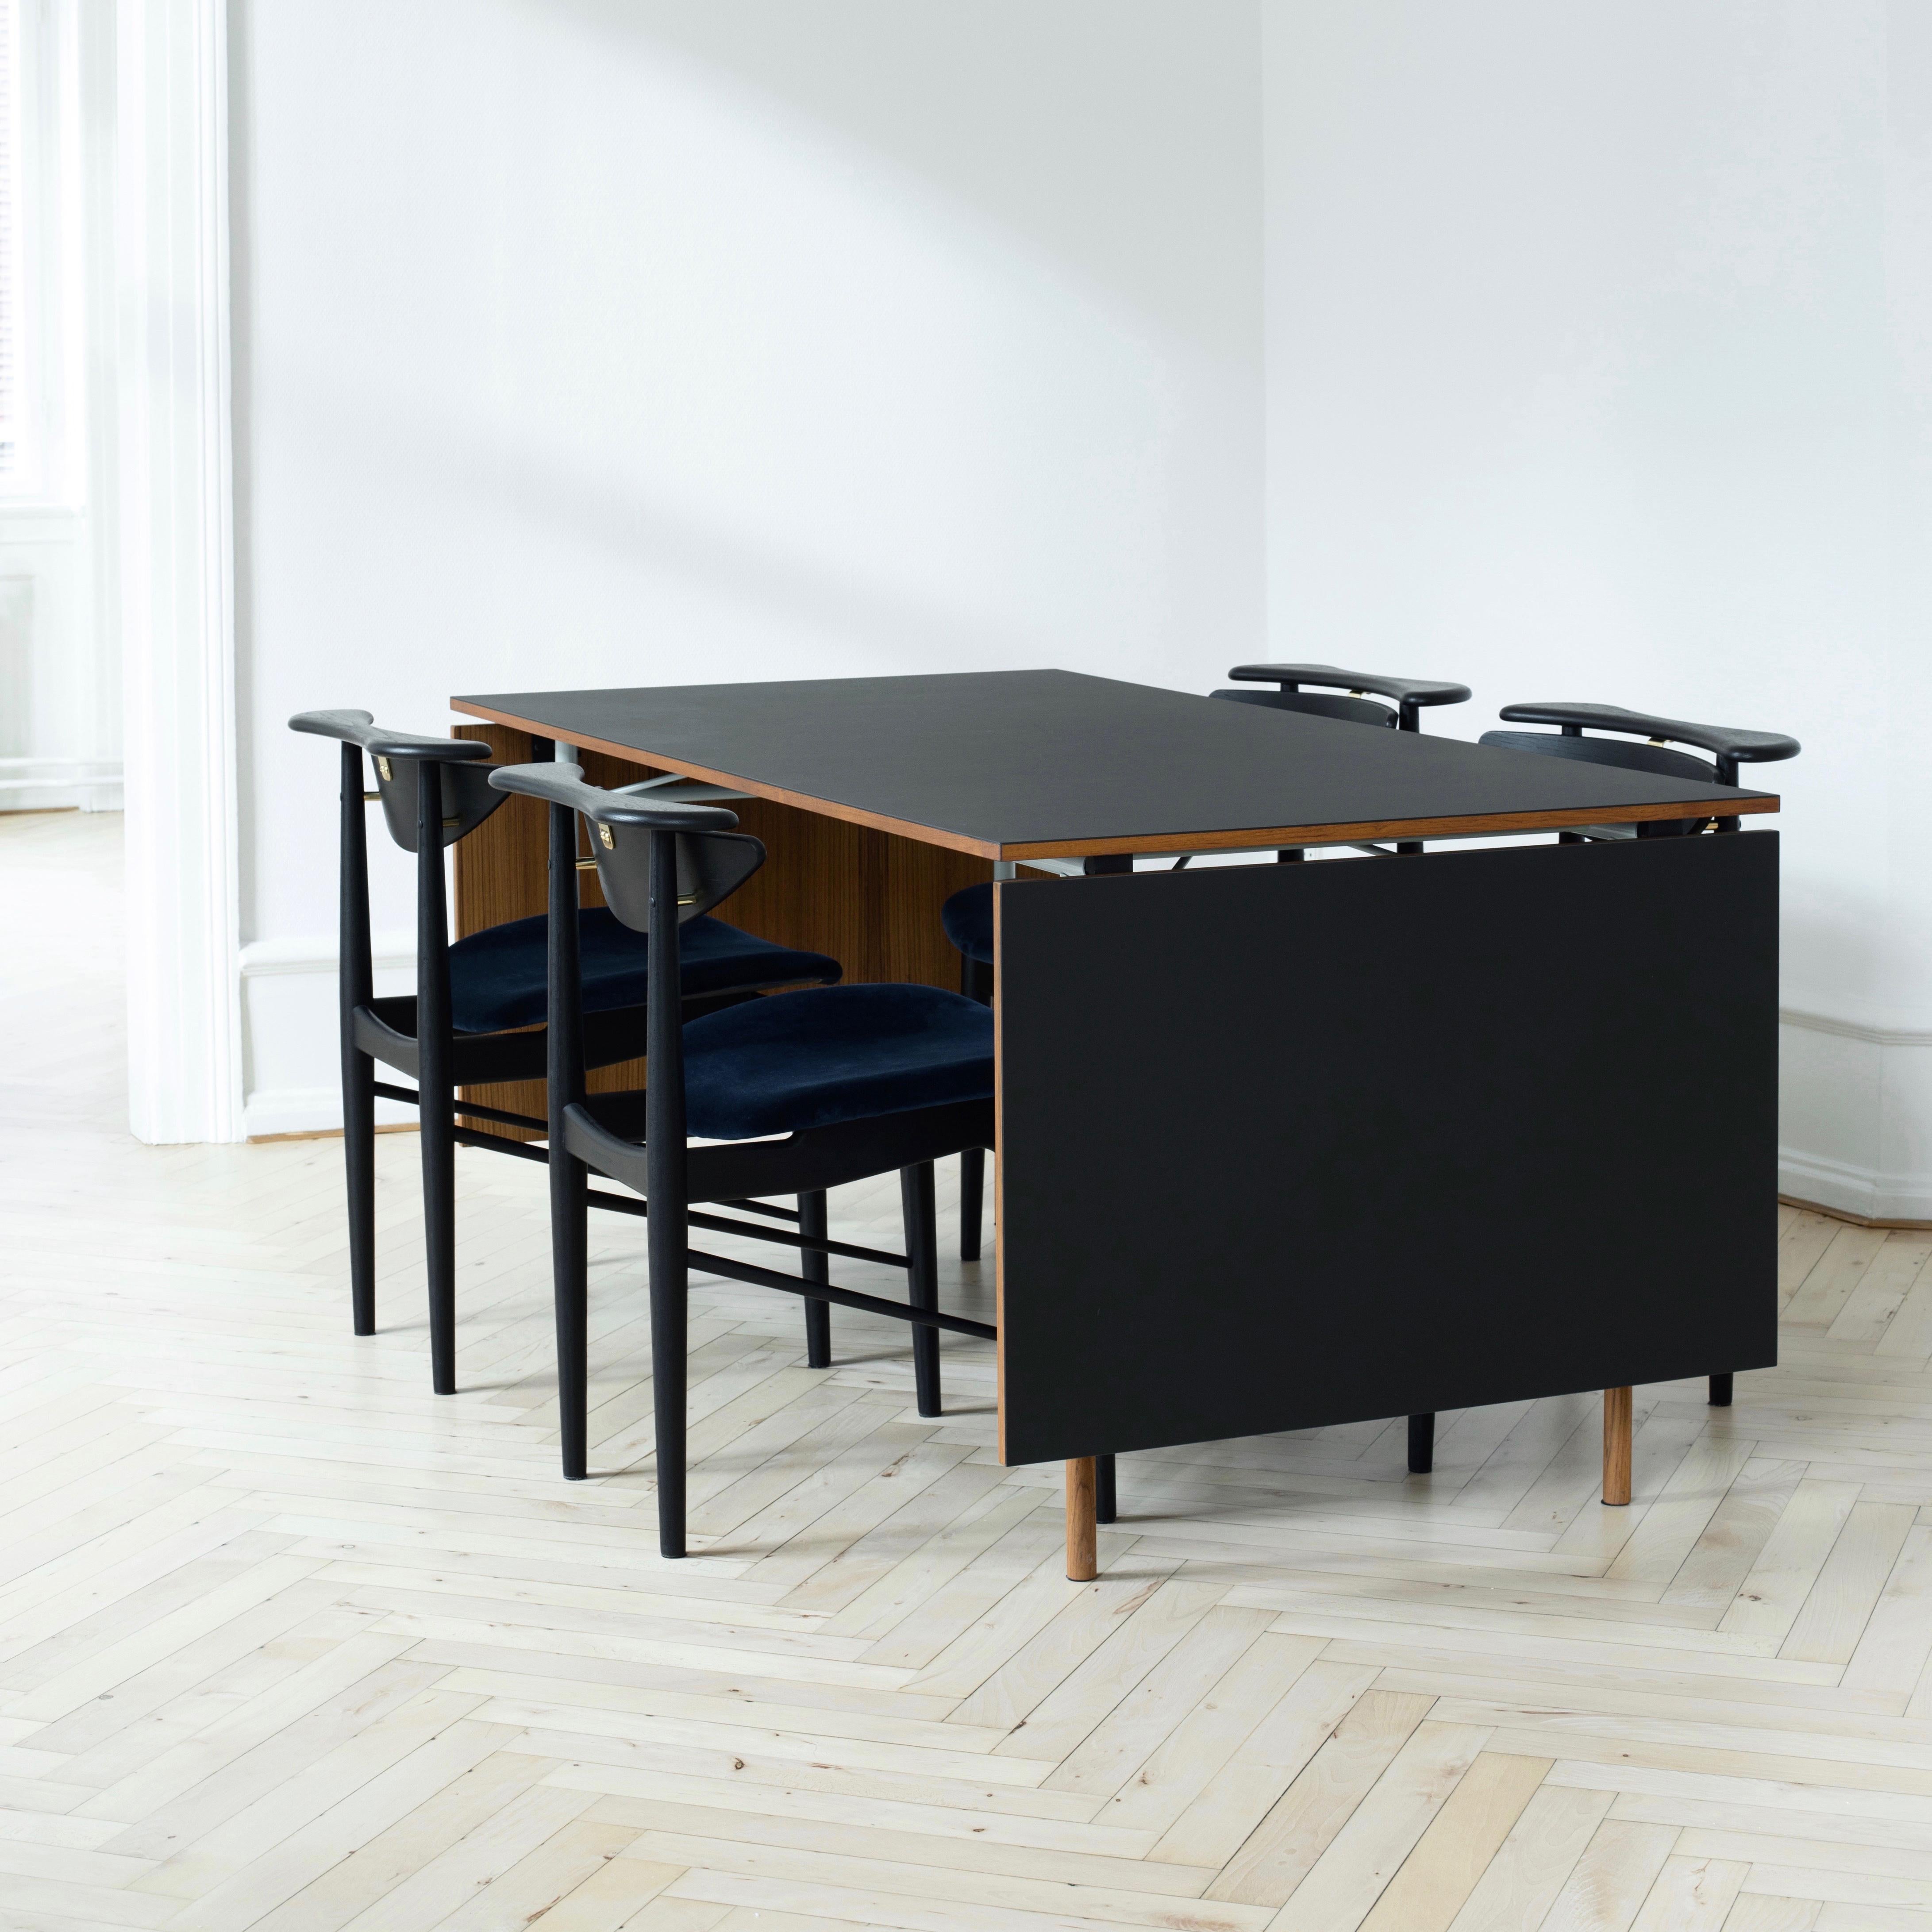 Finn Juhl Nyhavn Dining Table with Two Drop Leaves, Lino and Wood 9